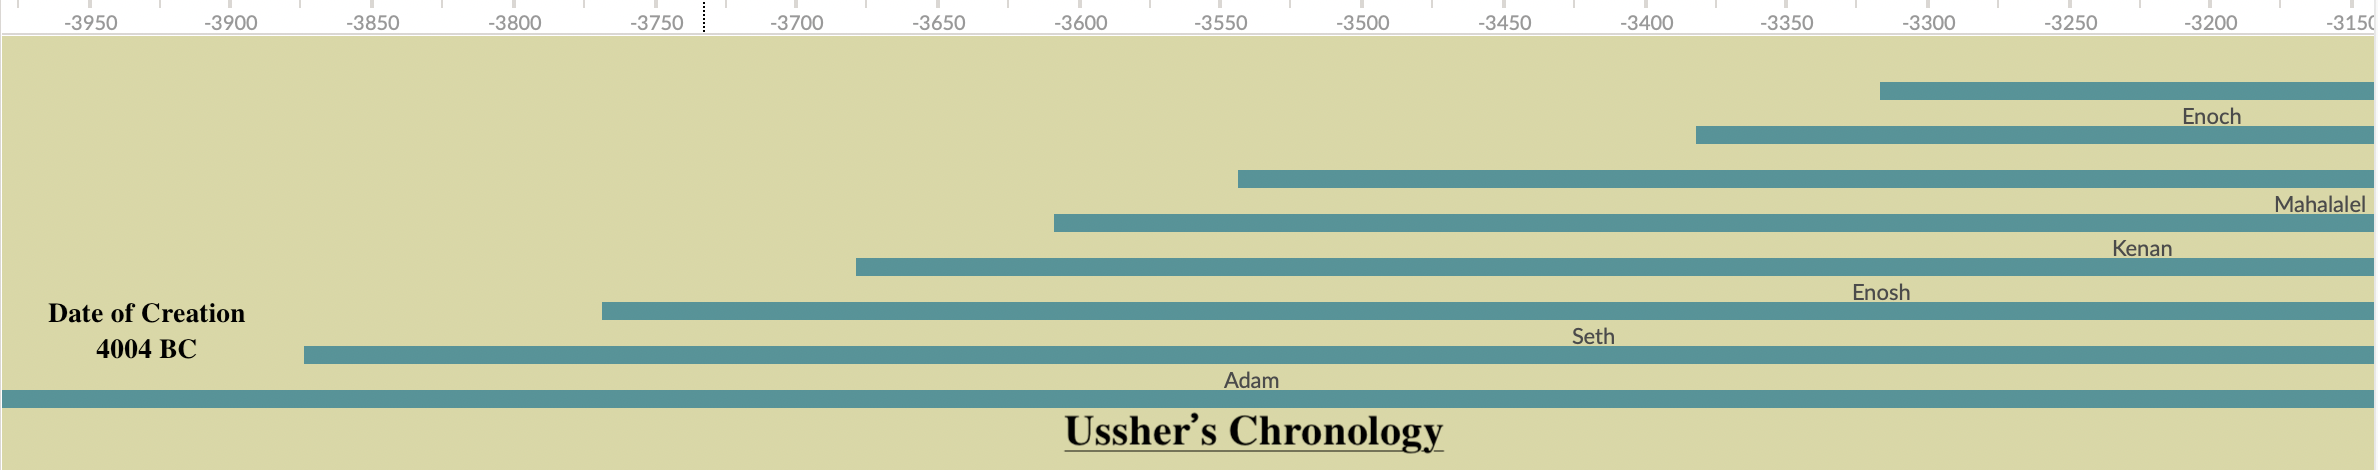 Archbishop Ussher's timeline of creation. Ussher postulated a date of 4004 BC. Other great names like Kepler and Newton were not far from his number in their proposed dates of creation.